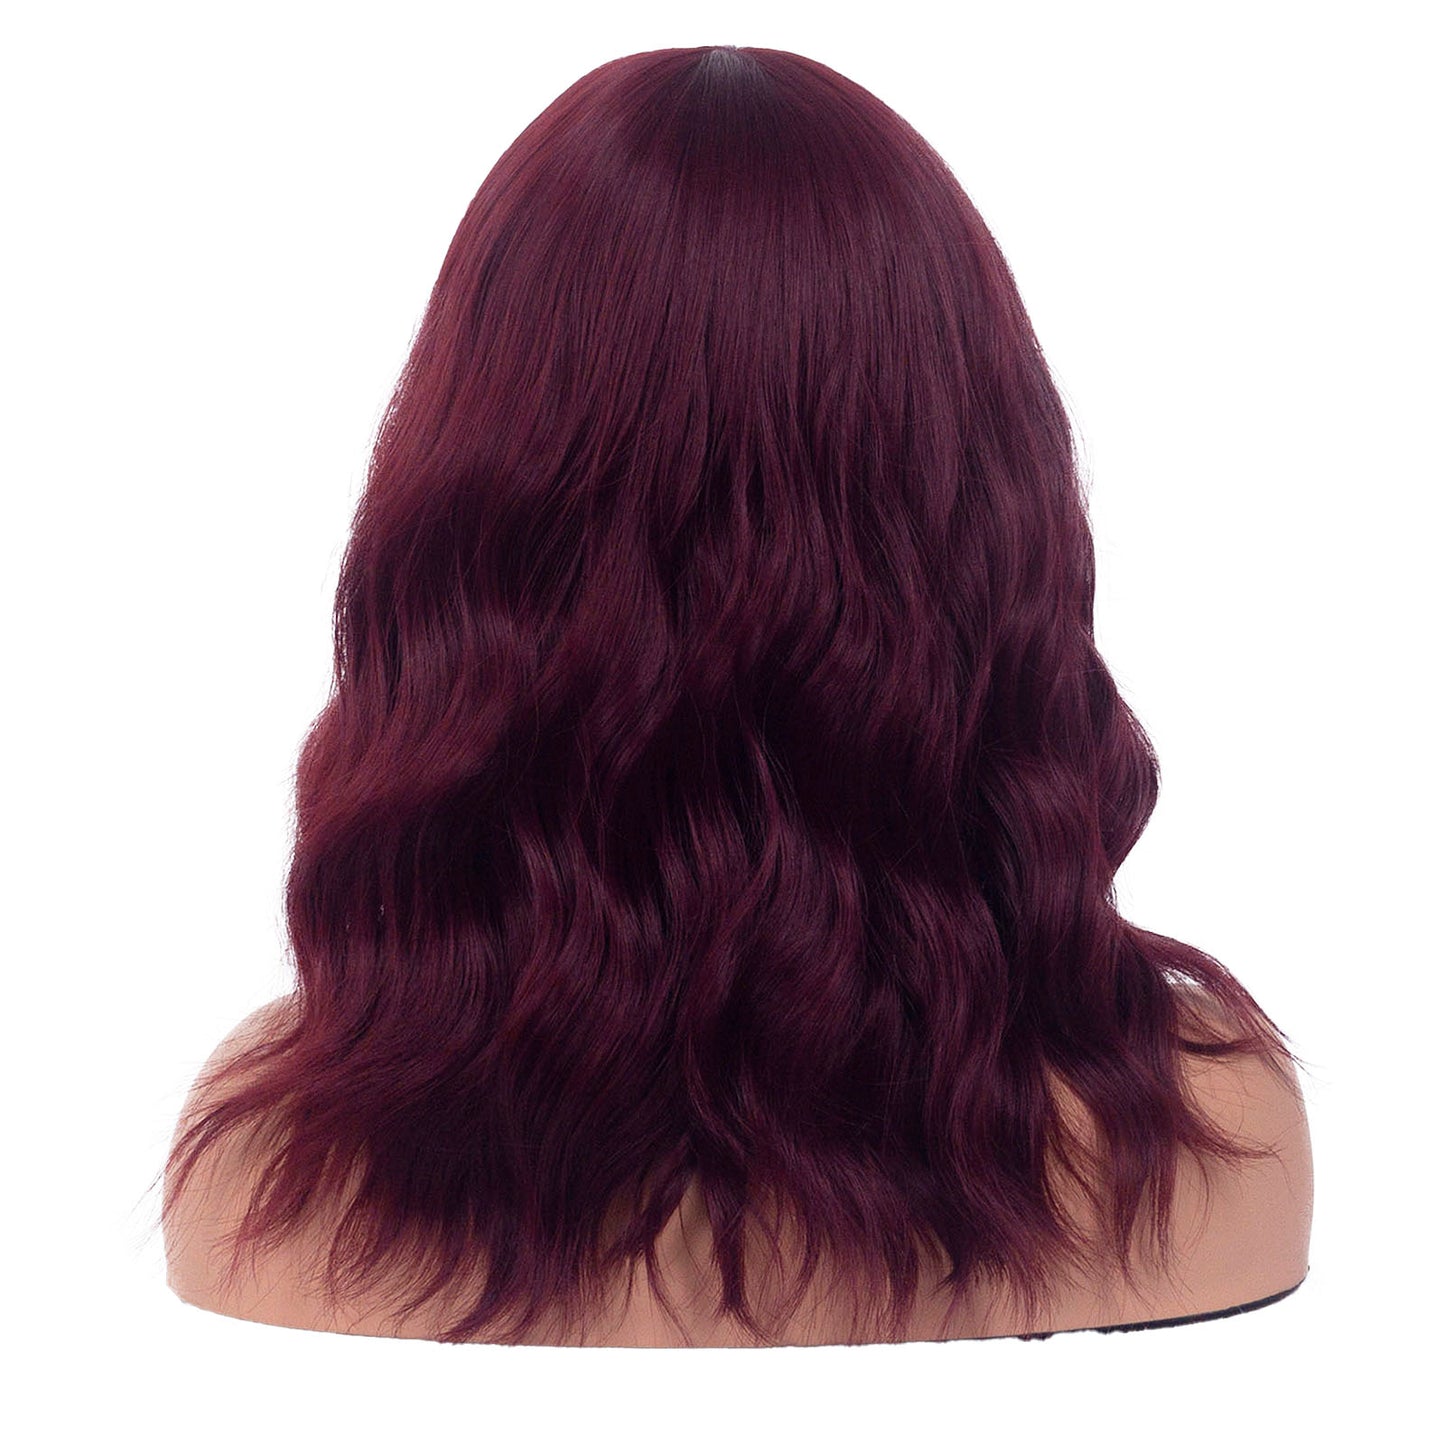 LINGDORA Curly Wine Red Wig with Bangs Cute Short Hair